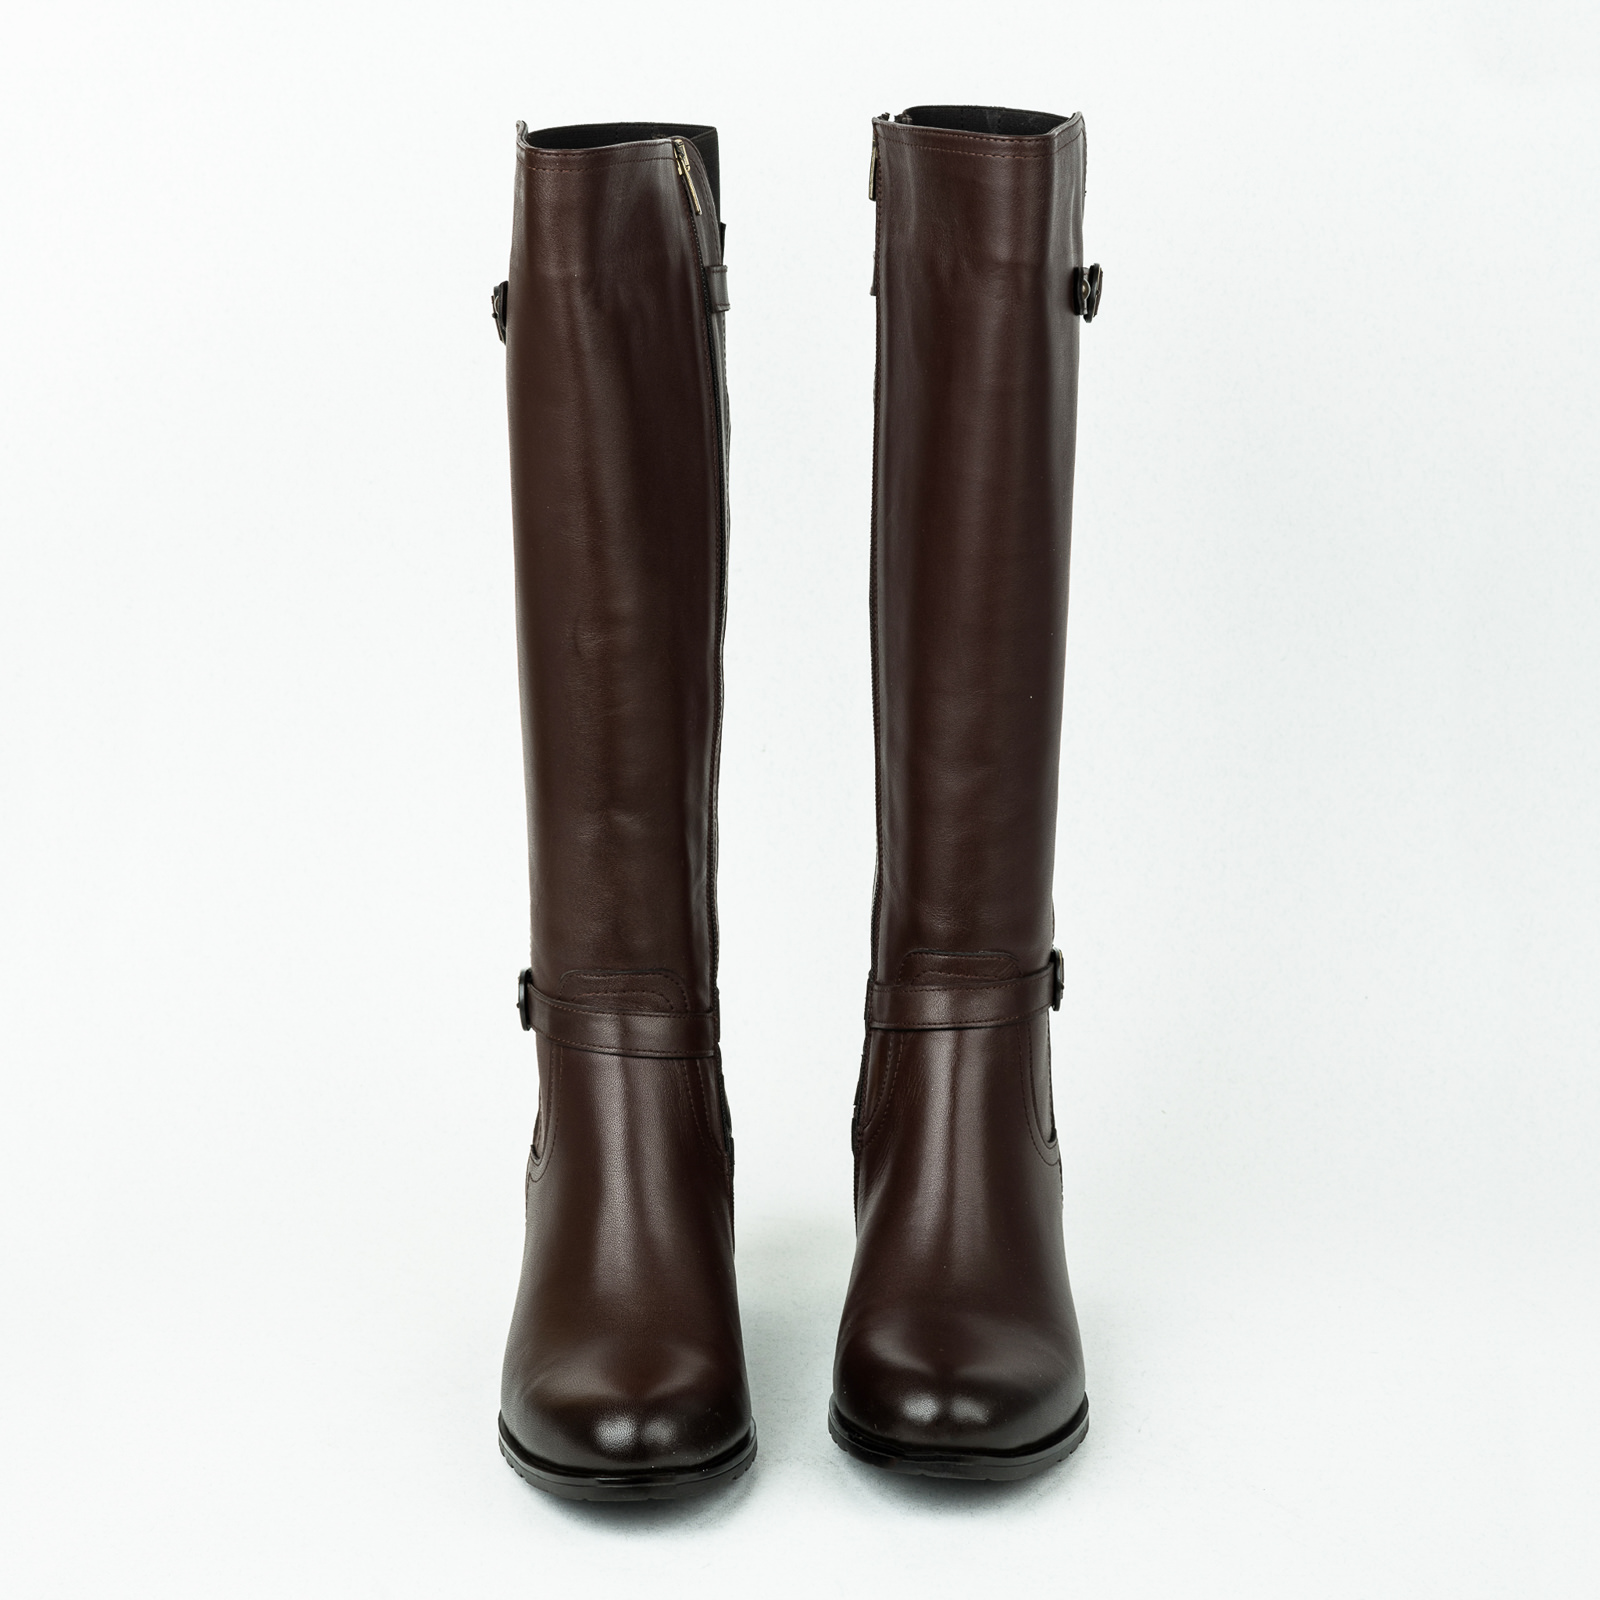 Leather boots B147 - BROWN